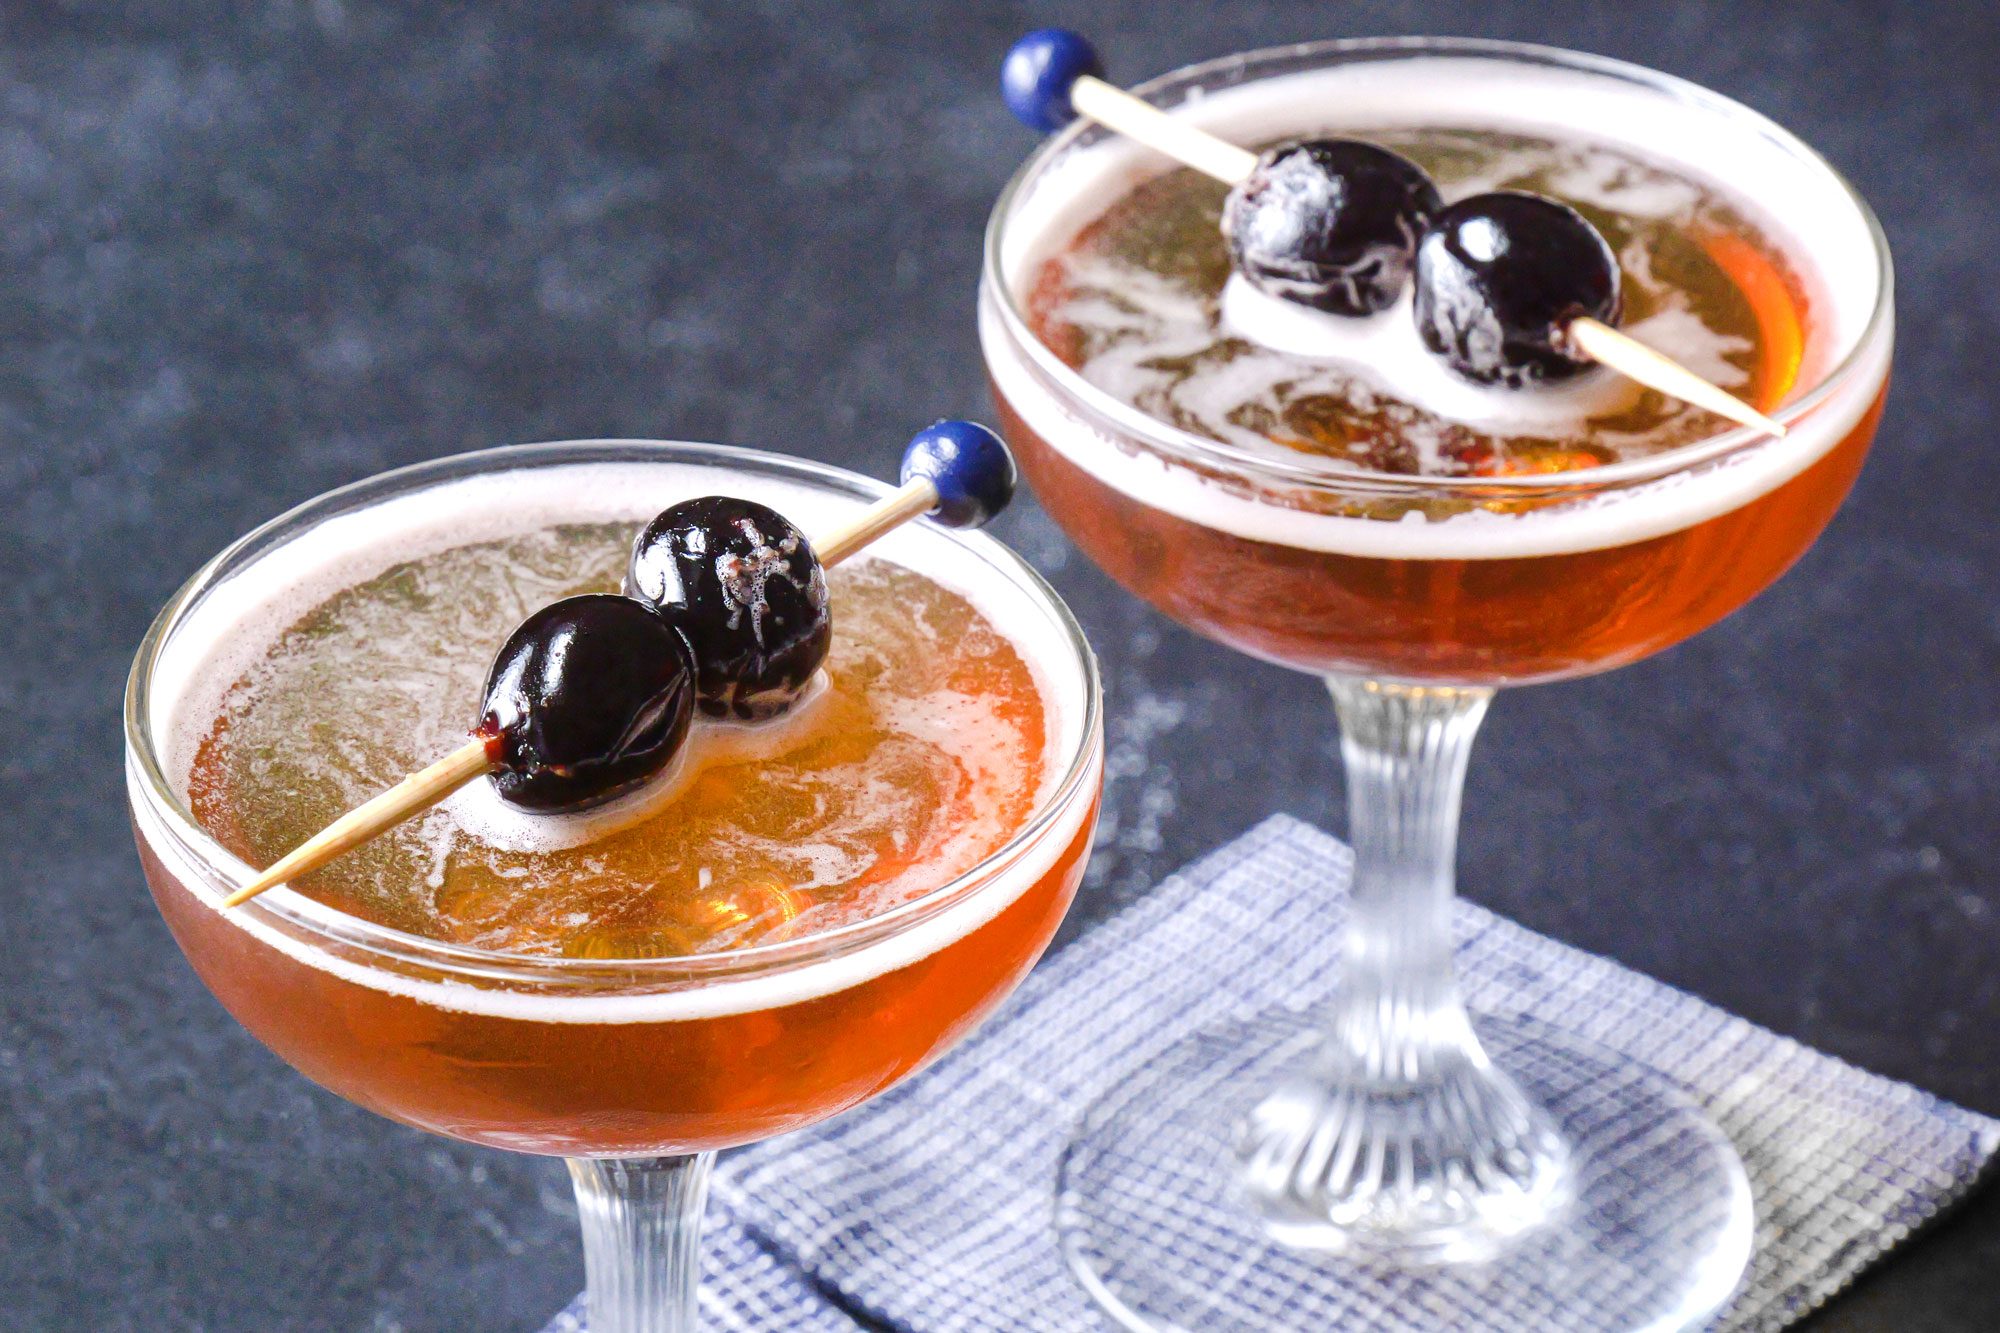 Two Rob Roy cocktails garnished with cherries served in elegant glasses